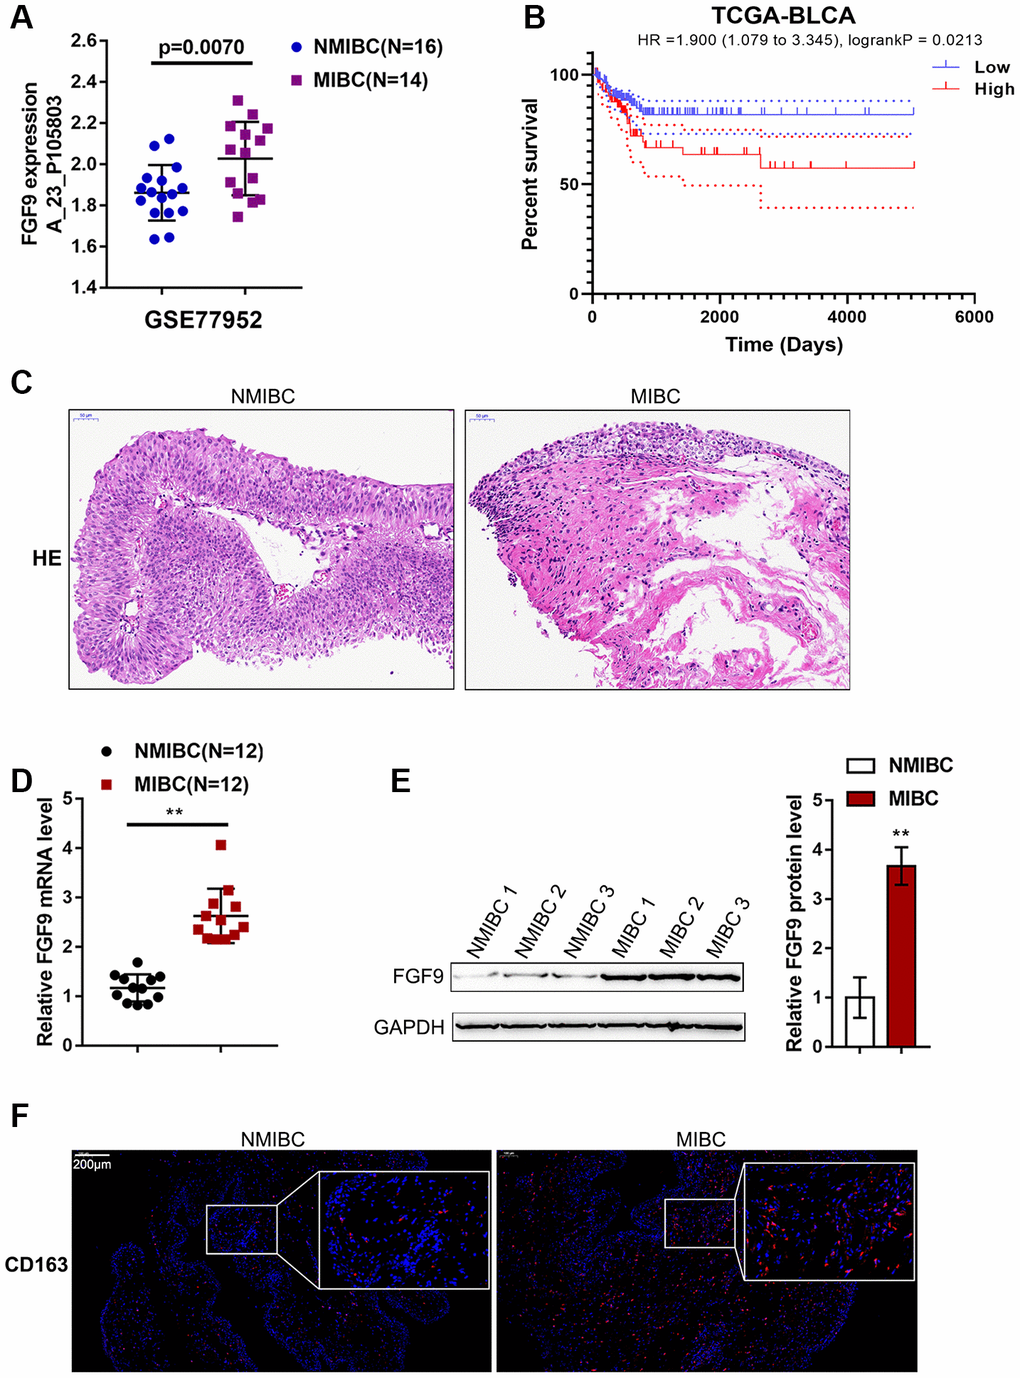 Expression of FGF9 in muscular invasive bladder cancer (MIBC) and non-muscular invasive bladder cancer (NMIBC) tissues. (A) The expression of FGF9 in MIBC and NMIBC tissues based on the data from GSE77952. P=0.007, student’s T test. (B) The overall survival of patients with bladder cancer was analyzed by grouping the samples based on FGF9 expression using log-rank test. Data are based on TCGA database. (C) The pathological changes in MIBC and NMIBC tissues was shown by H&E staining. (D) The expression of FGF9 in tissues of 12 cases of MIBC and 12 cases of NMIBC was determined using real-time PCR. PE) The protein levels of FGF9 in tissues of 12 cases of MIBC and 12 cases of NMIBC were determined using immunoblotting. PF) The protein distribution of CD163 (M2 macrophage marker) was determined in MIBC and NMIBC tissues using immunofluorescence (IF) staining.